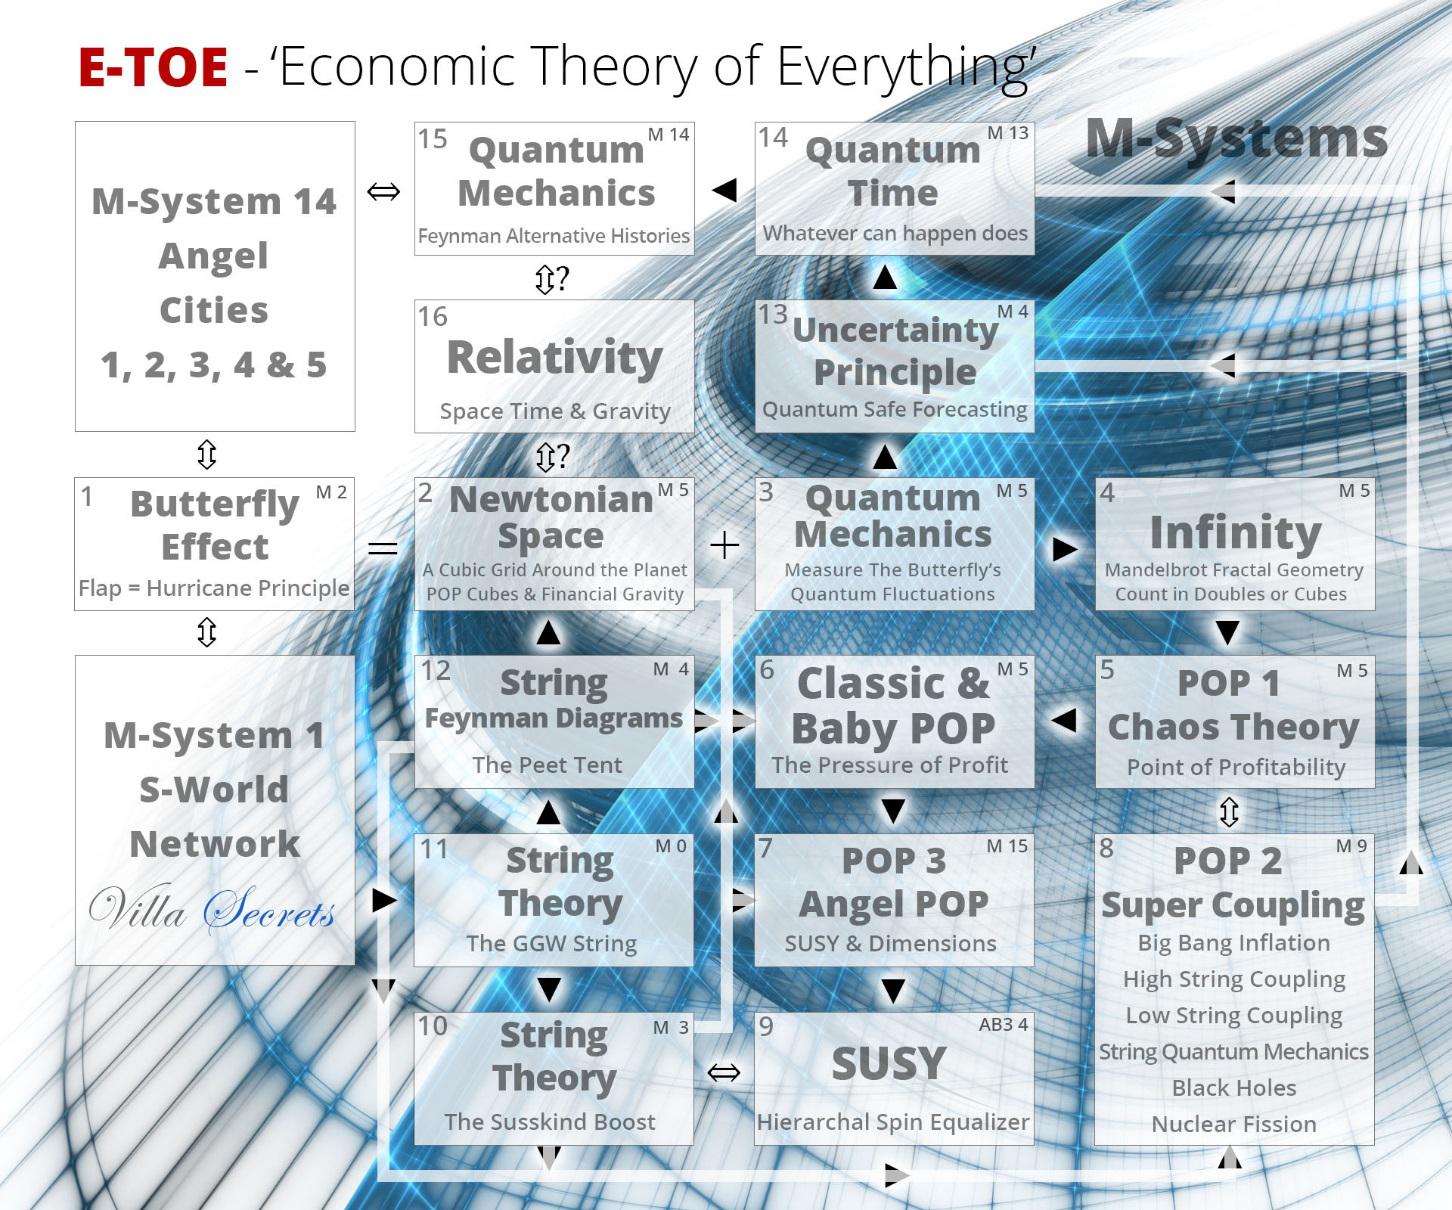 E- TOE - Economic Theory of Everything - M-systems